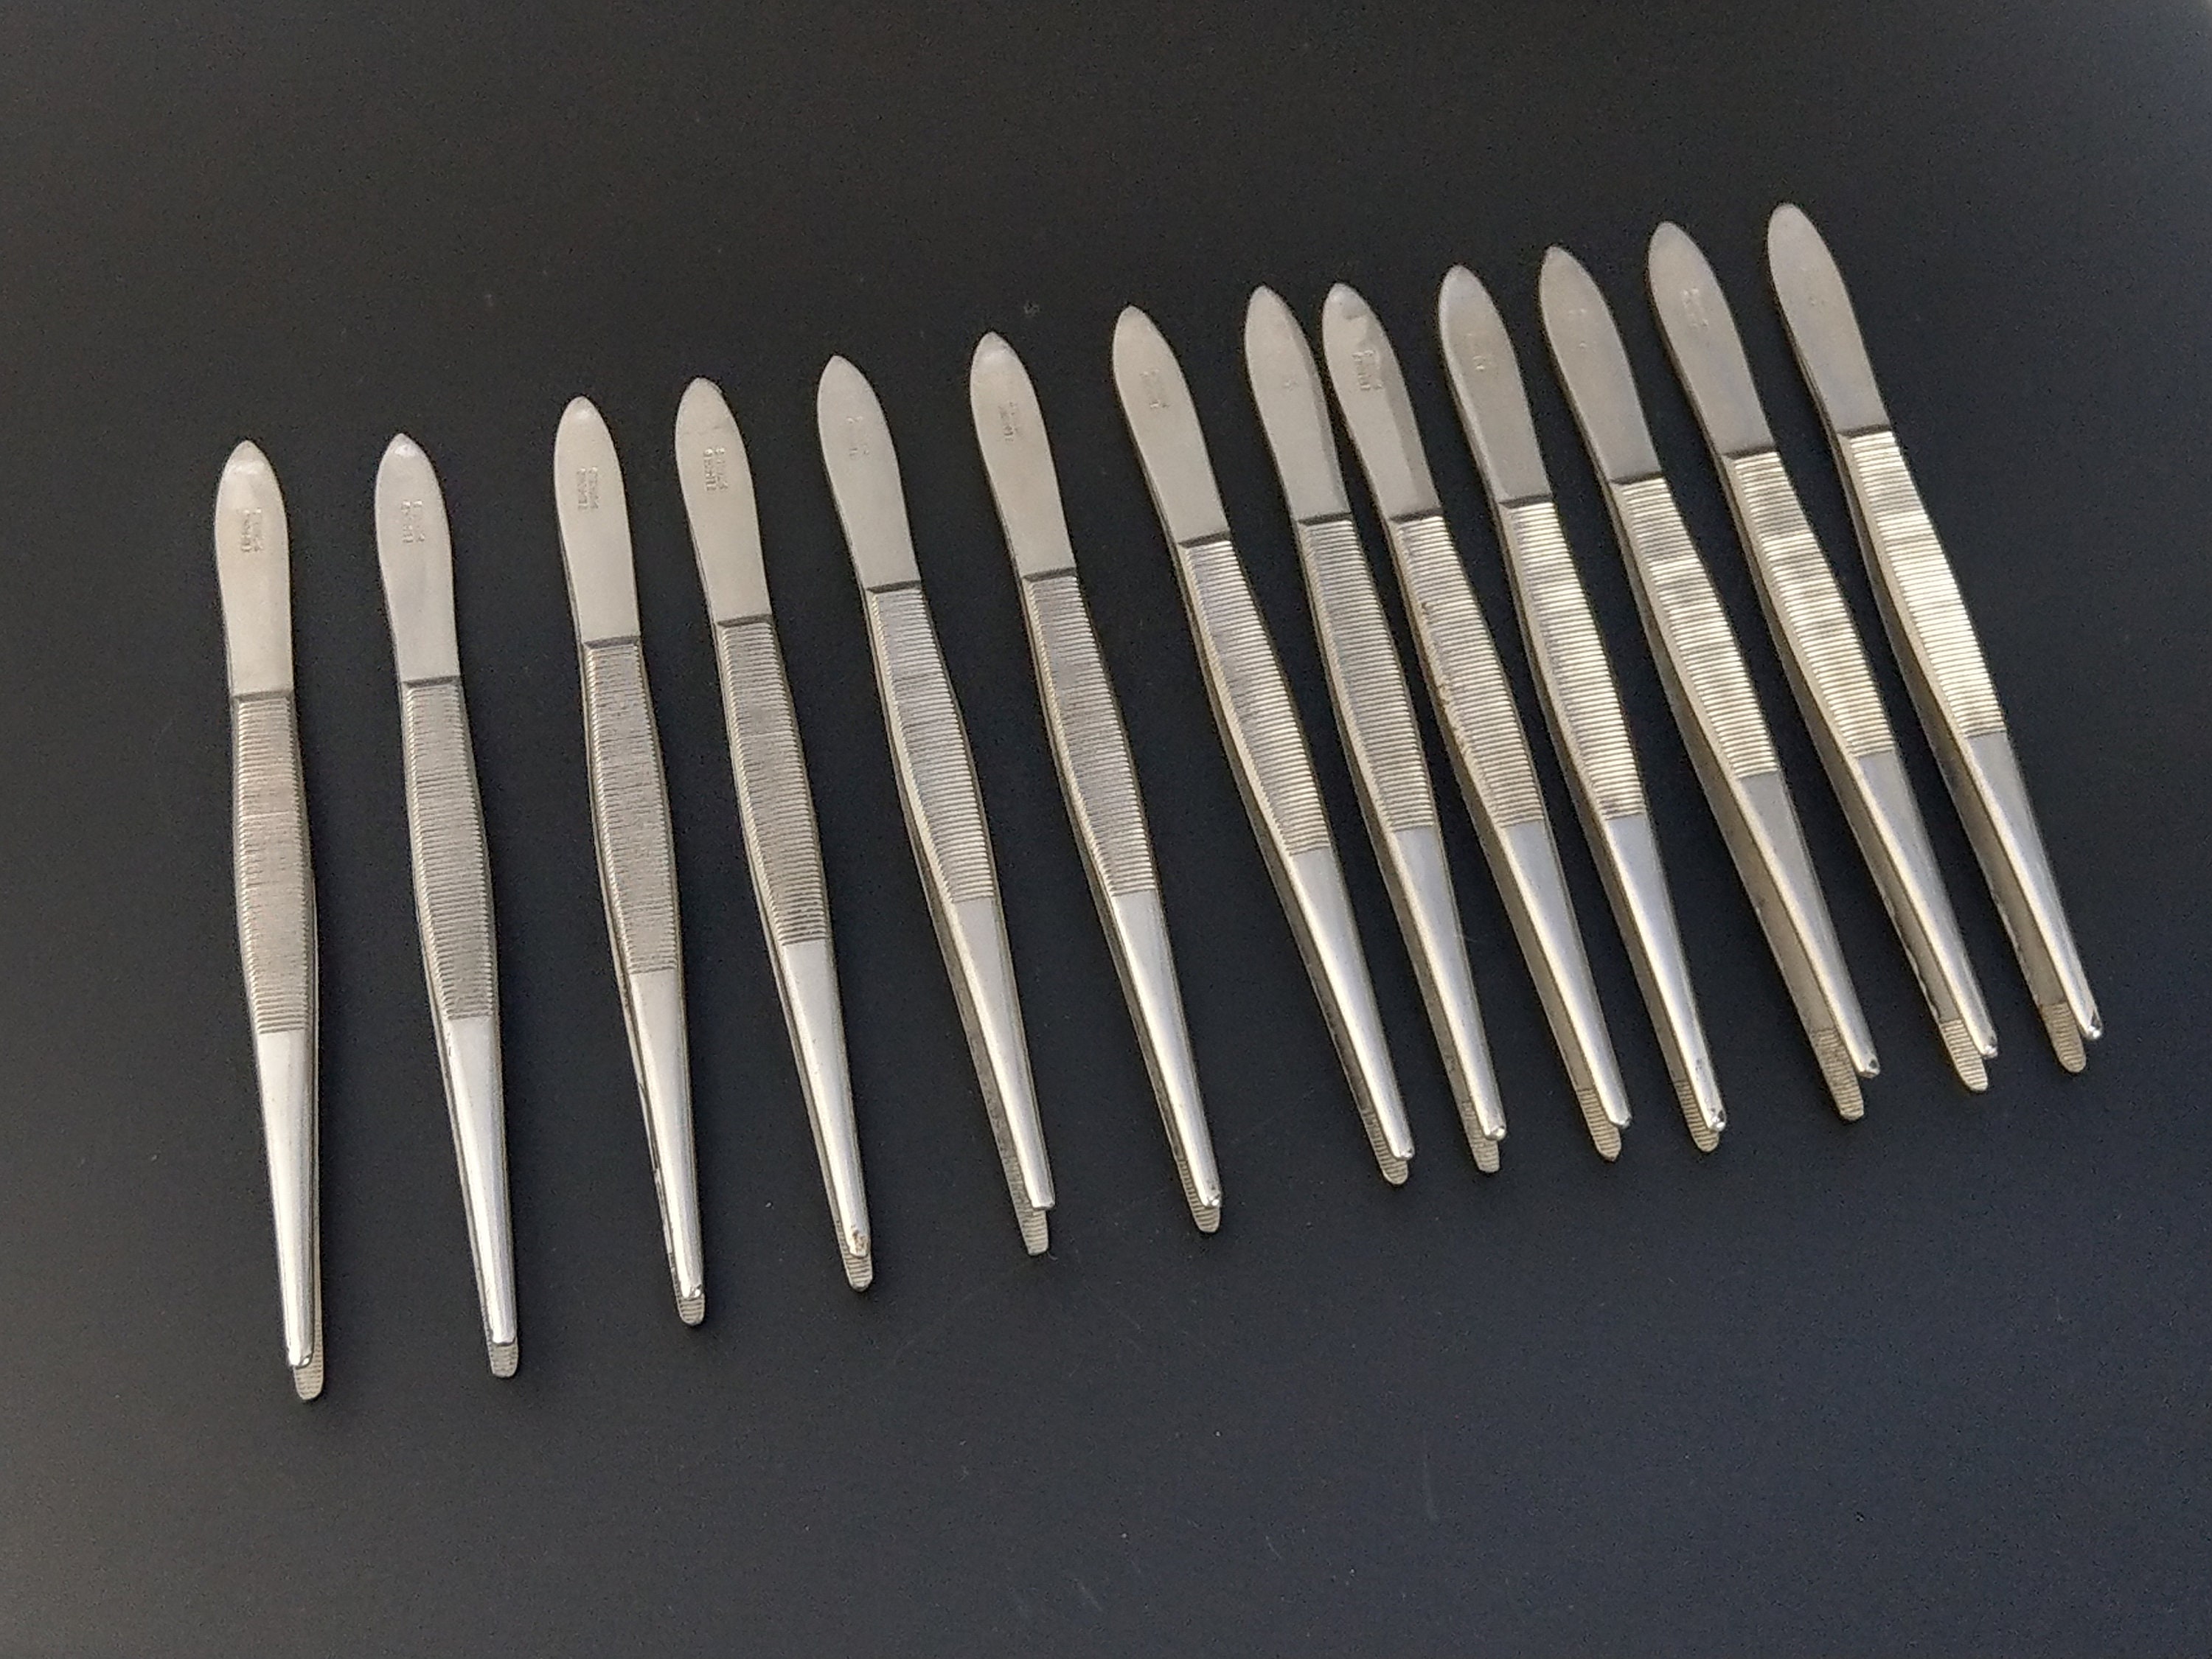 6 of Each Size John James Blunt End Harness Needles, 24 total